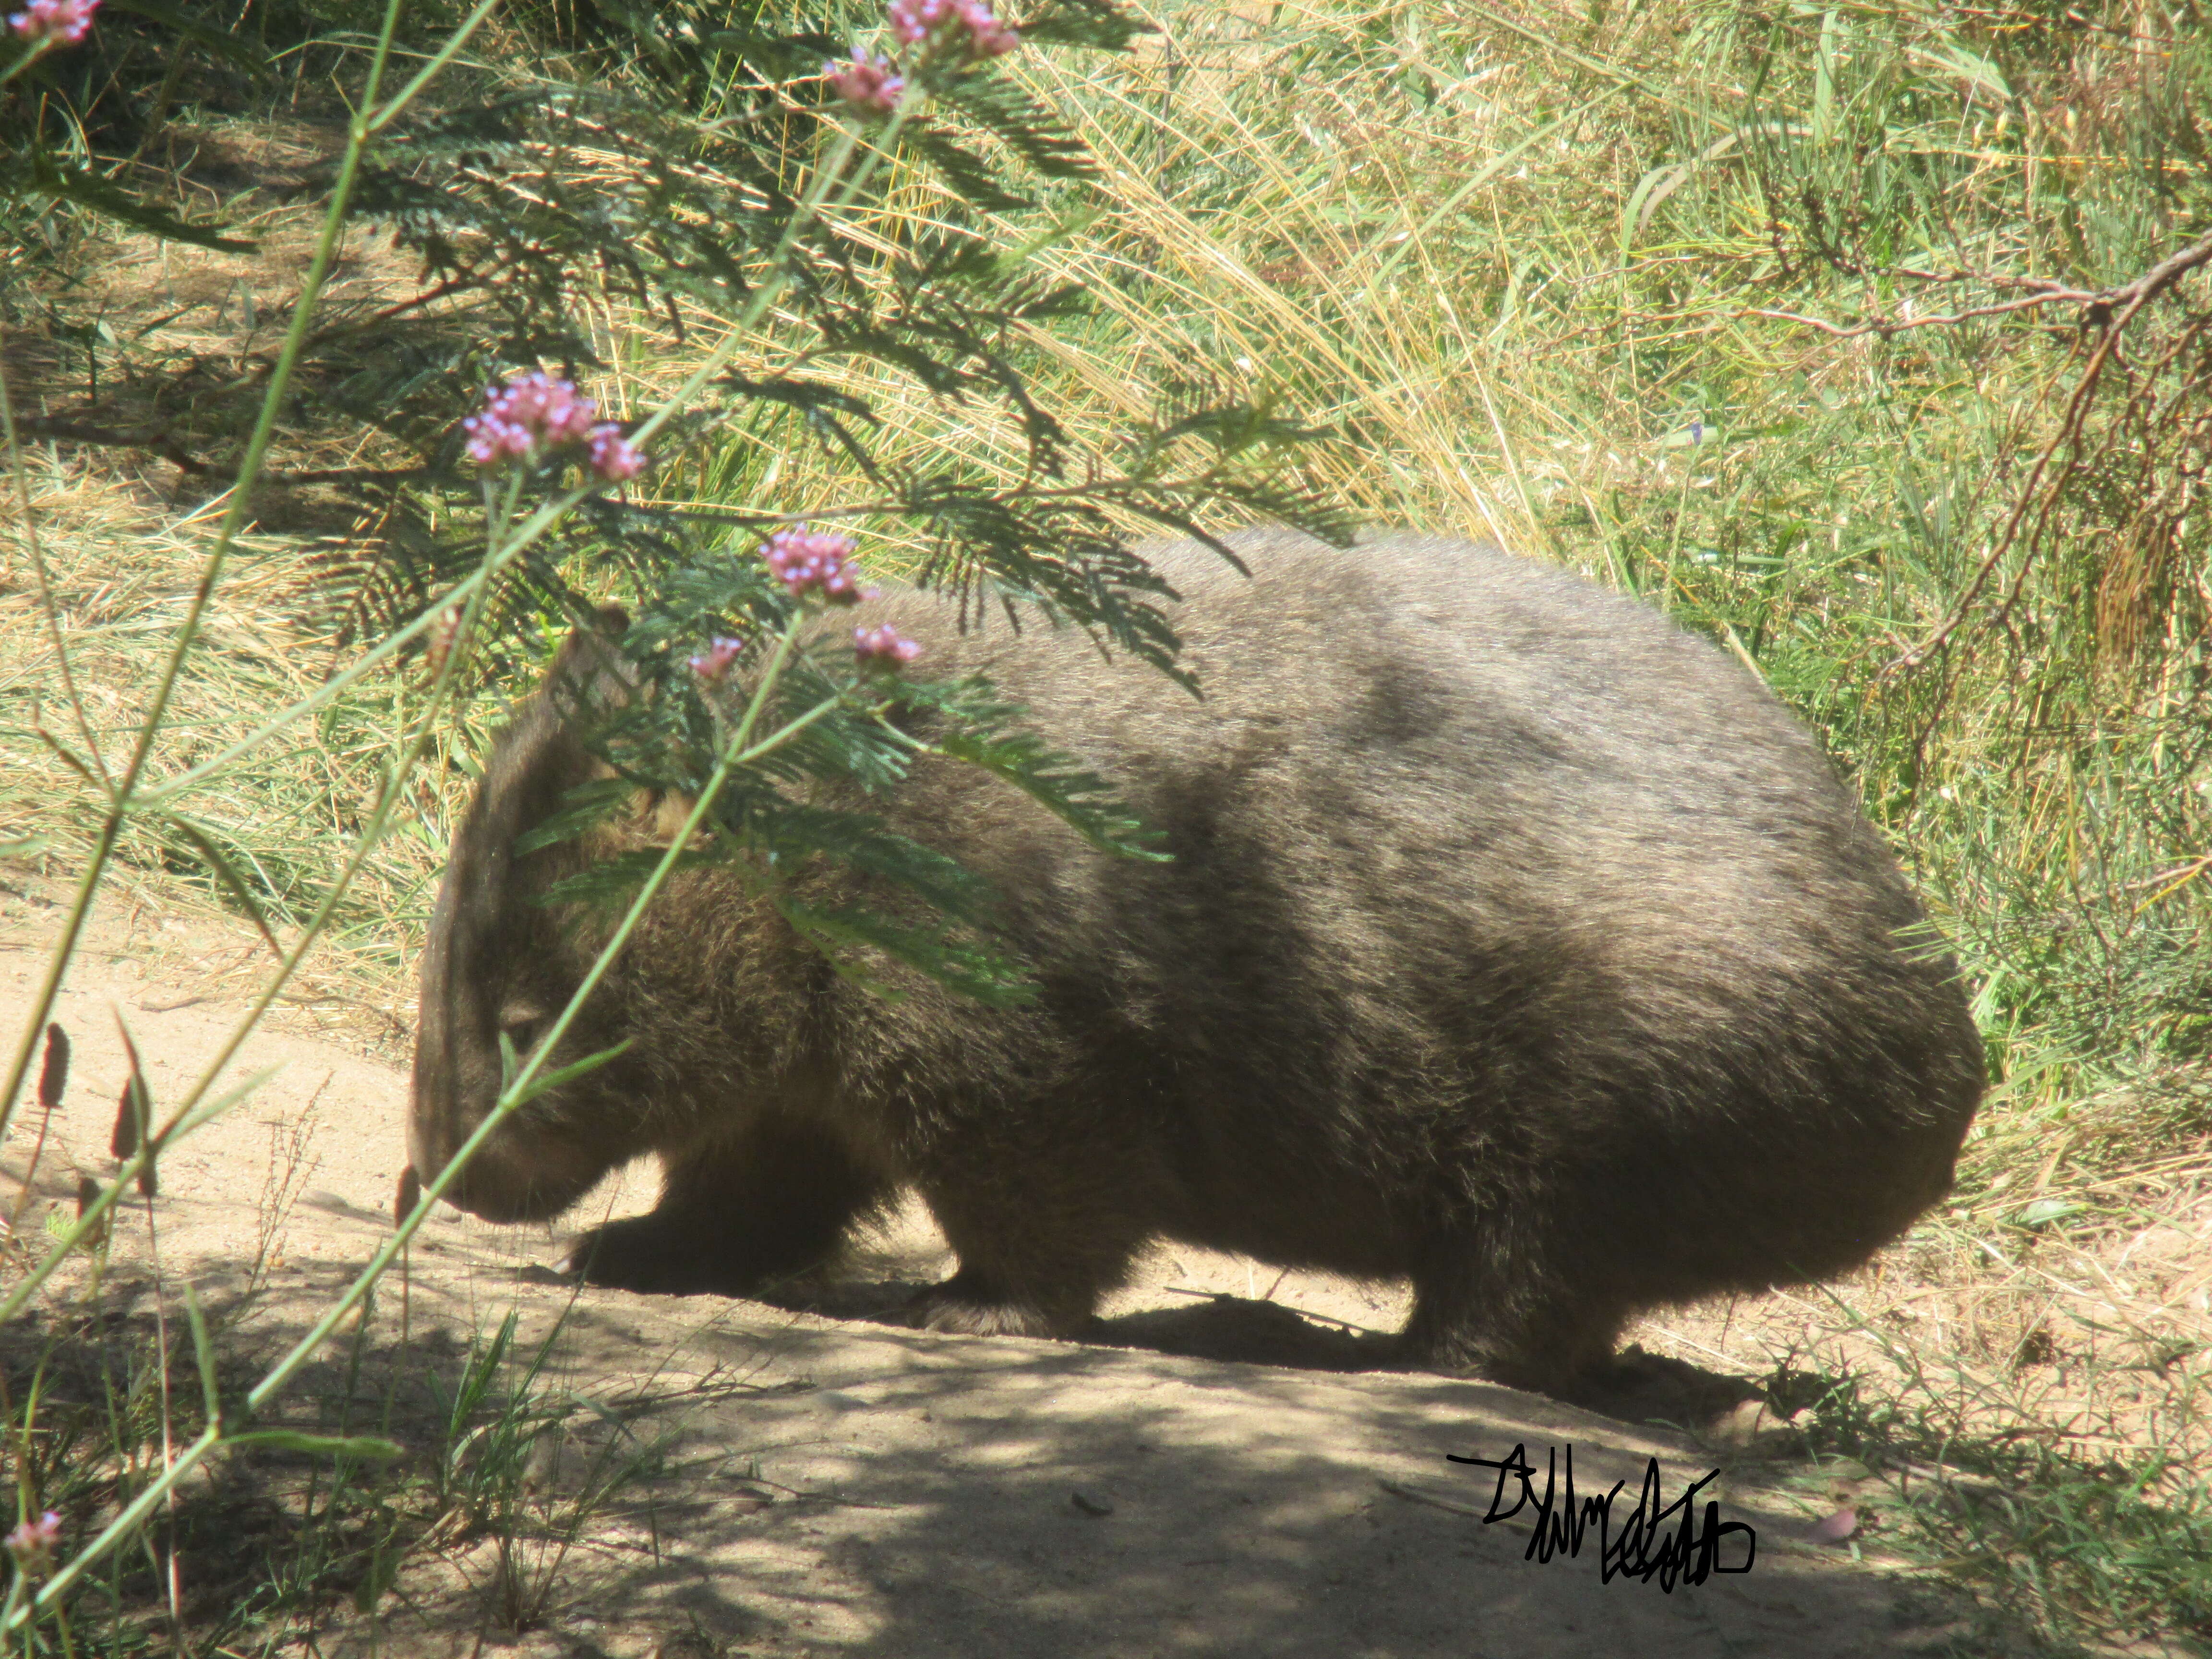 Image of Bare-nosed Wombats